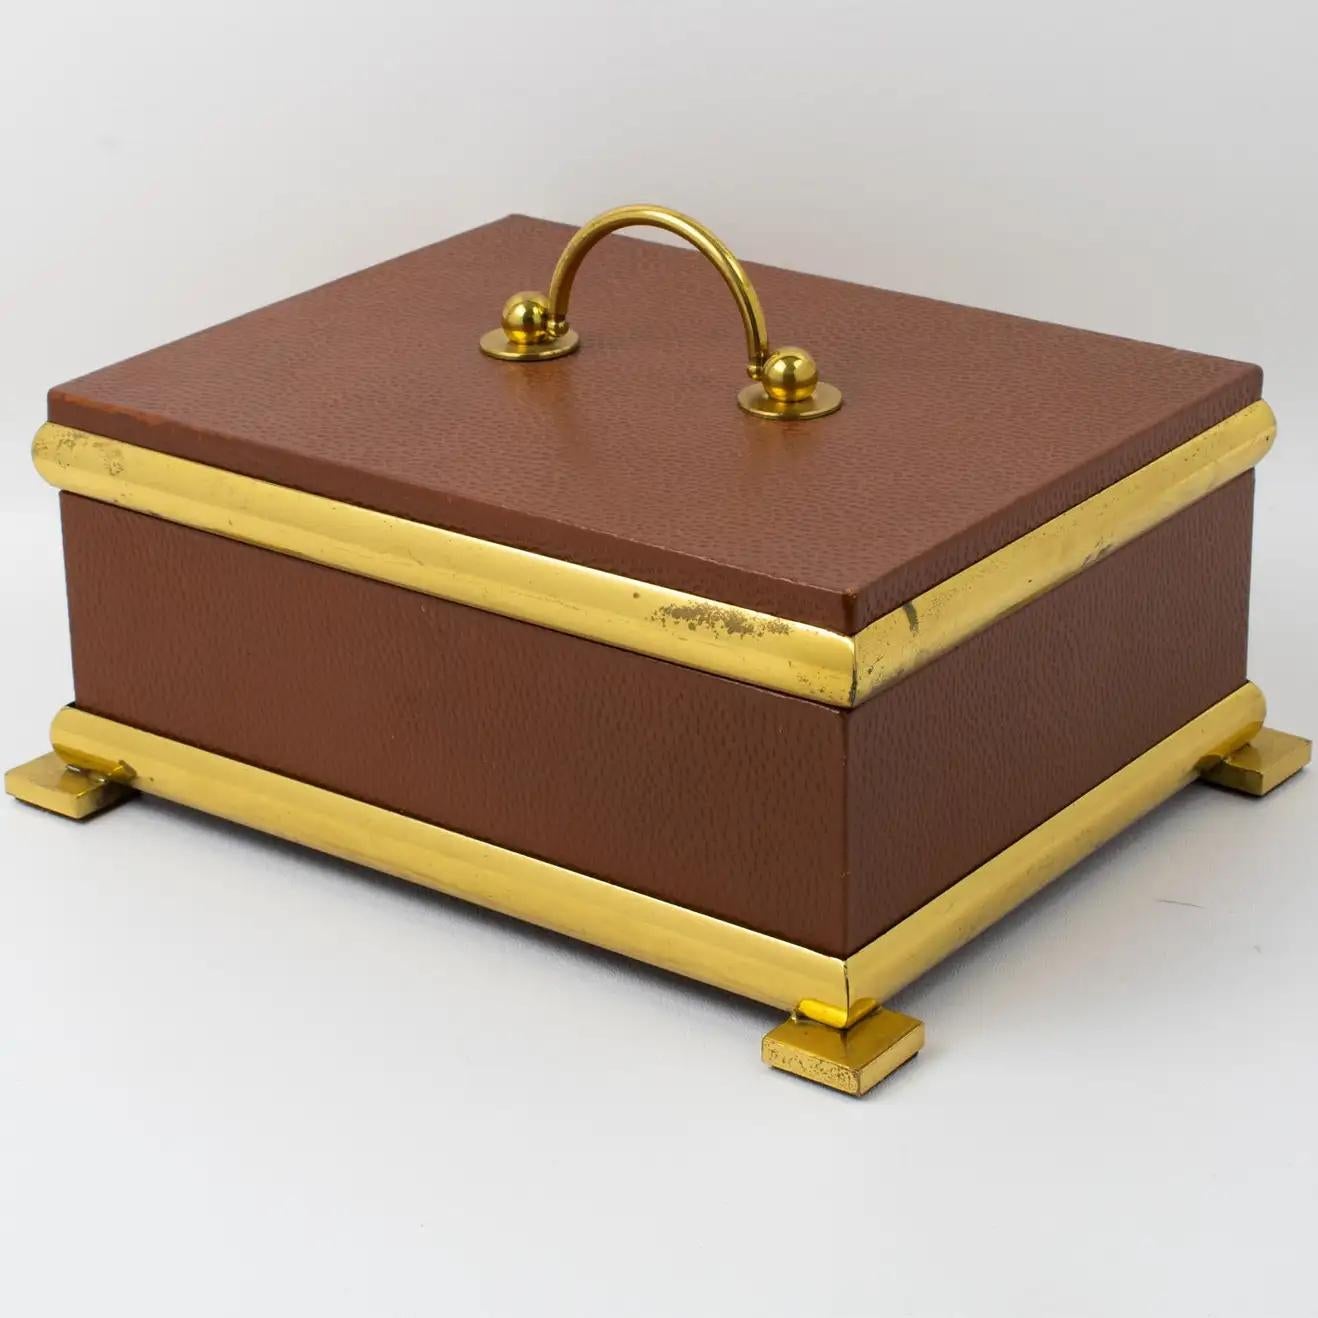 Italian Leather and Brass Decorative Box, 1950s Empire Style For Sale 8